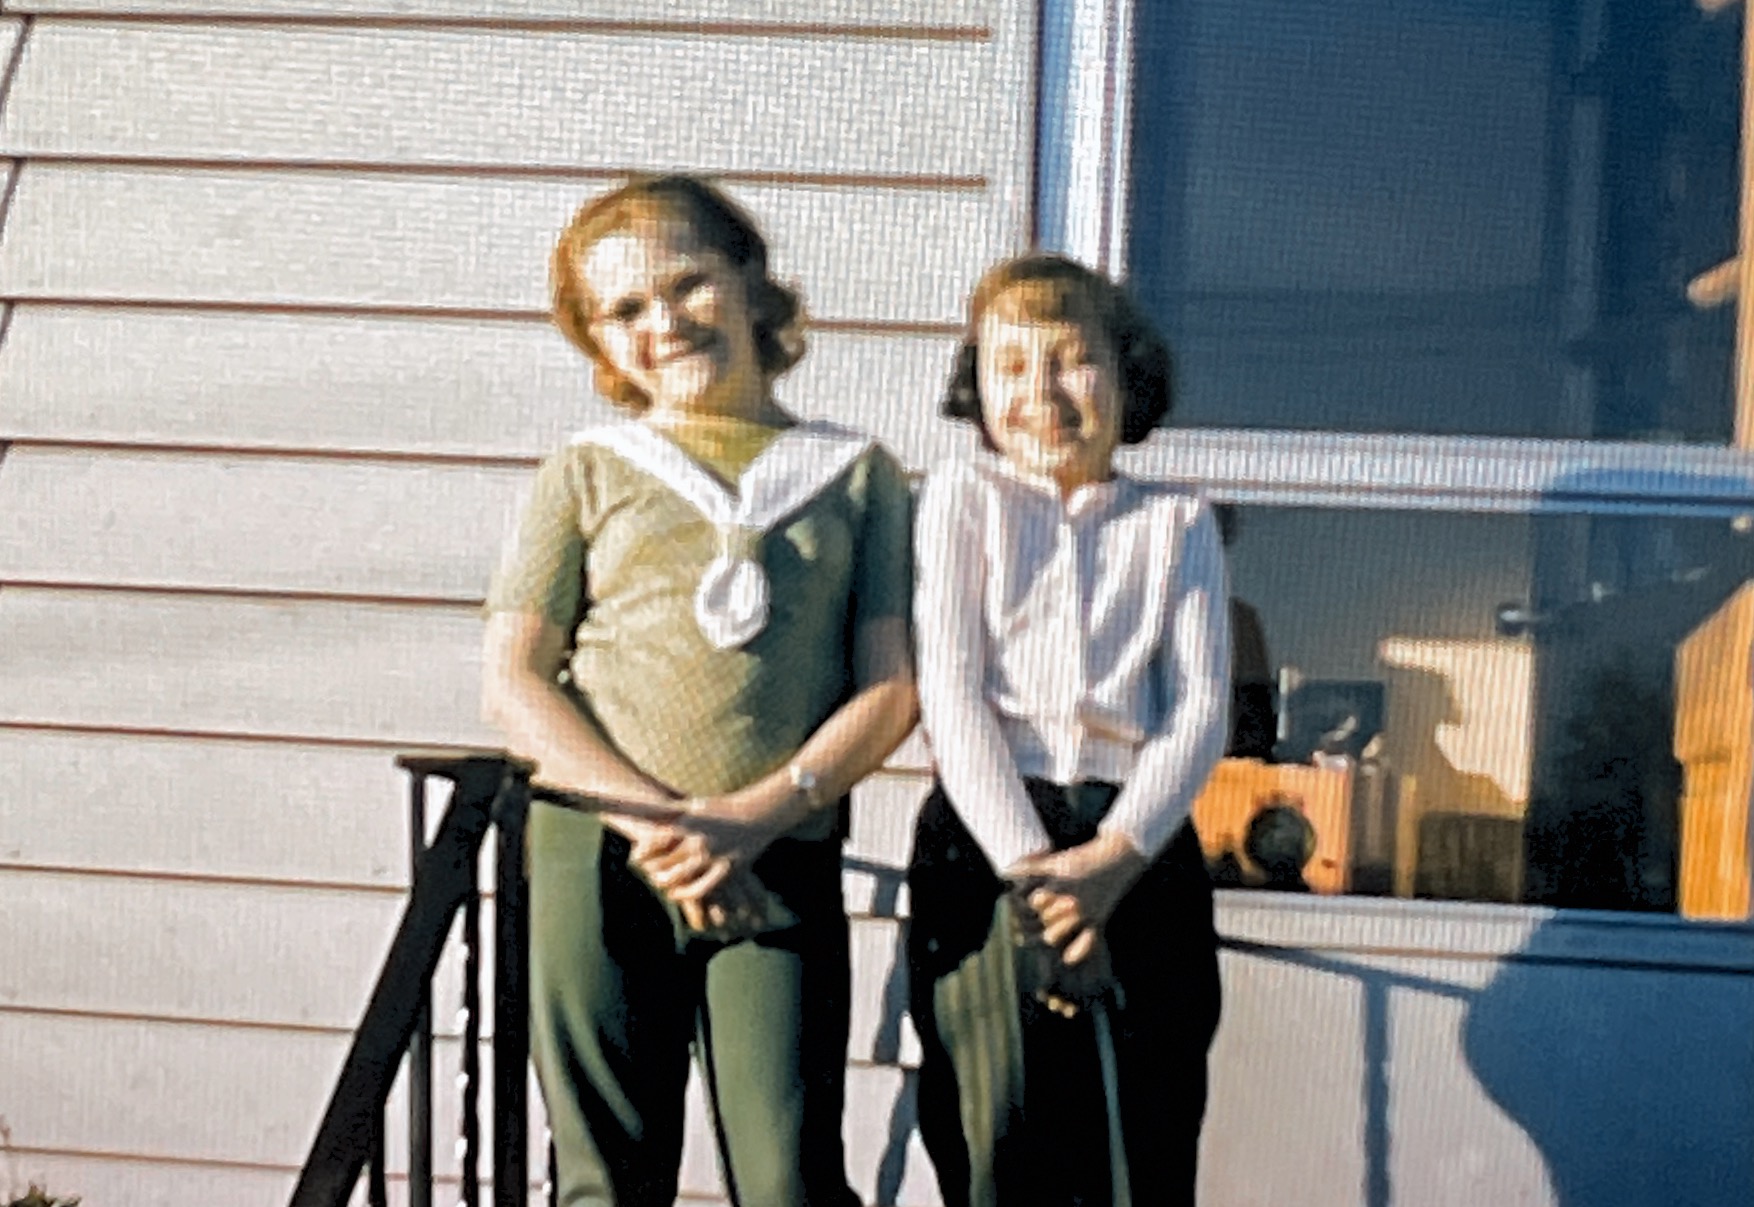 BBF Beth and me. We lived in different towns and would switch spending 2 summer weeks at each others homes.